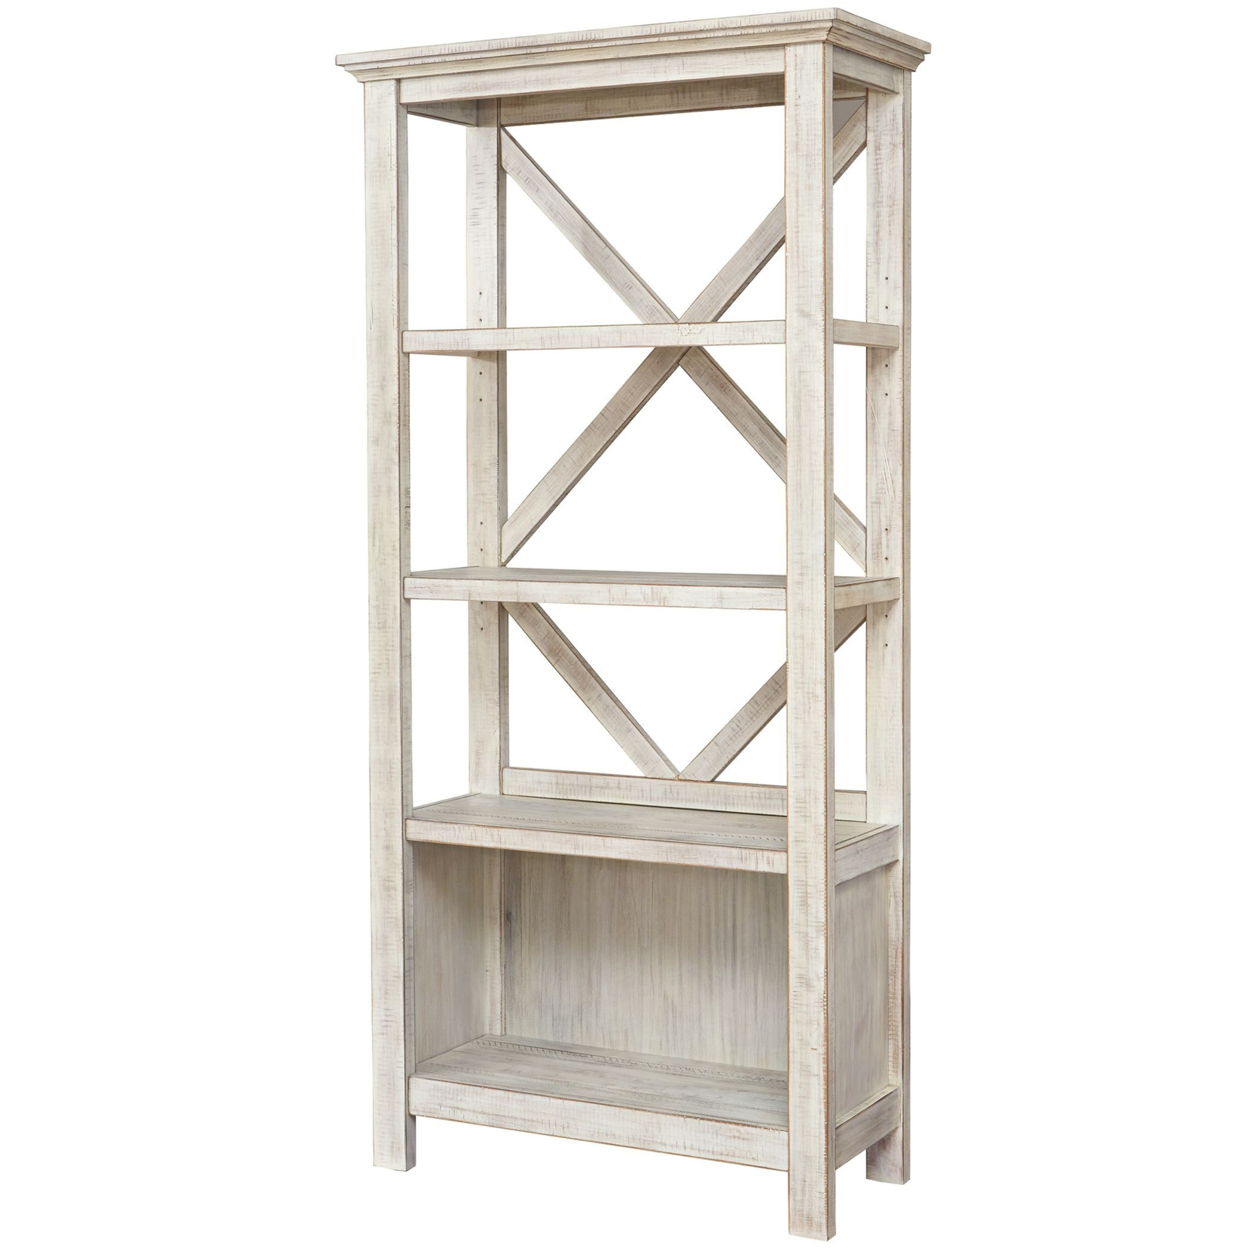 X Shape Back Bookcase With 3 Open Shelves And 1 Open Compartment, White- Saltoro Sherpi